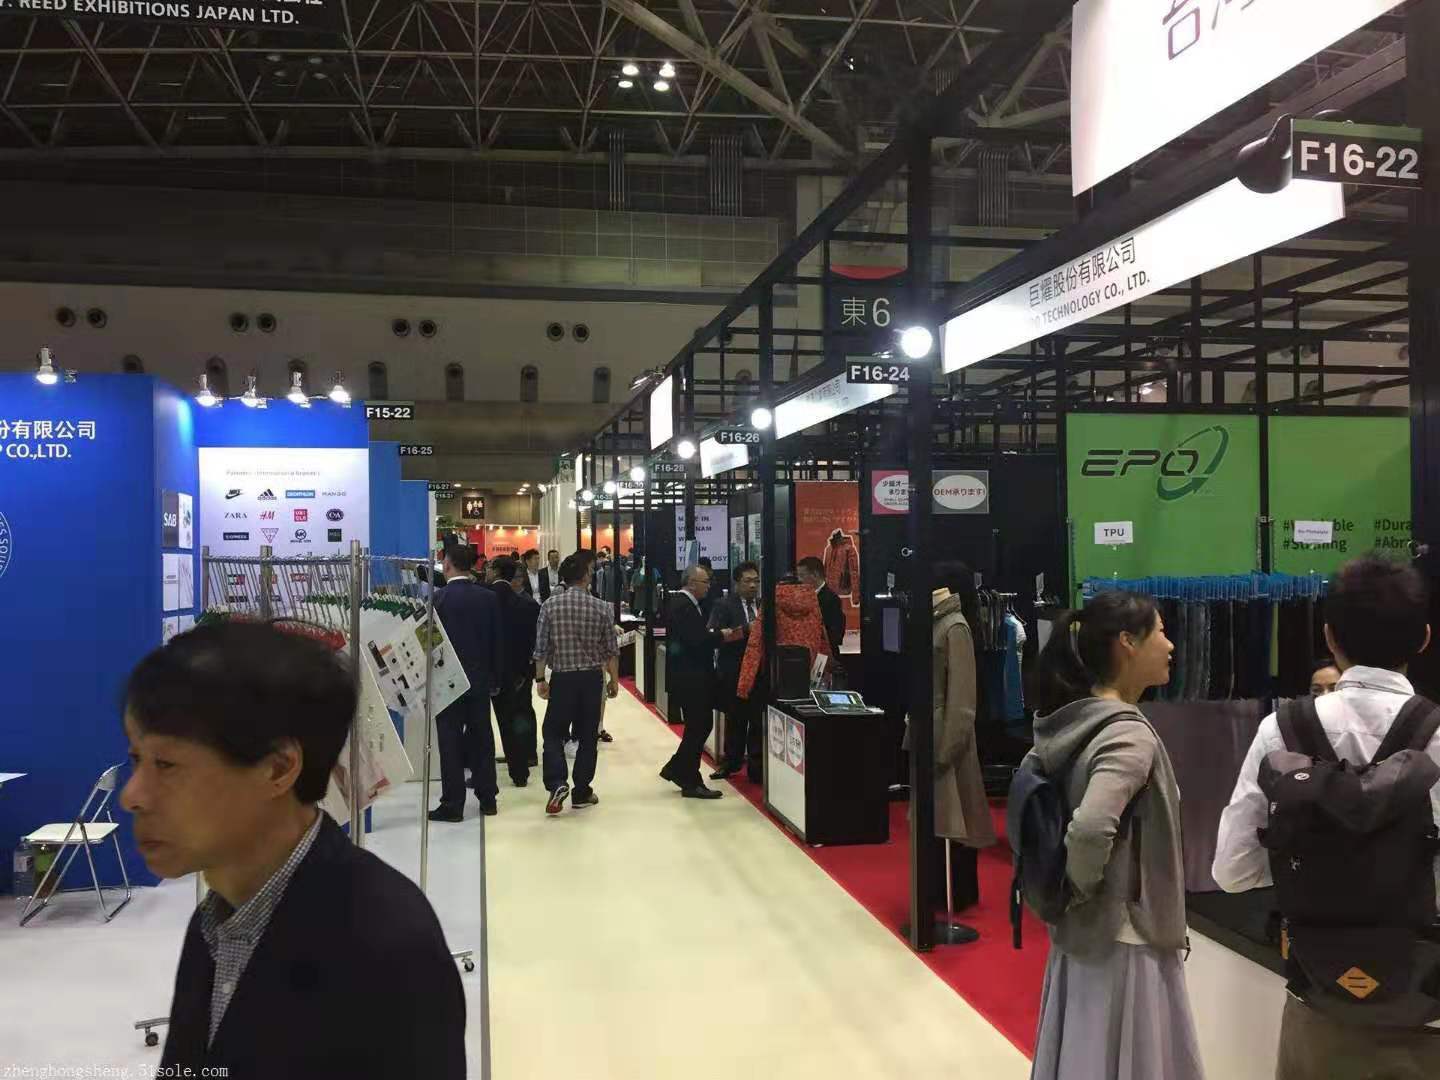 Spuntree General Manager Alan went to Japan to participate in the exhibition exchange industry experience